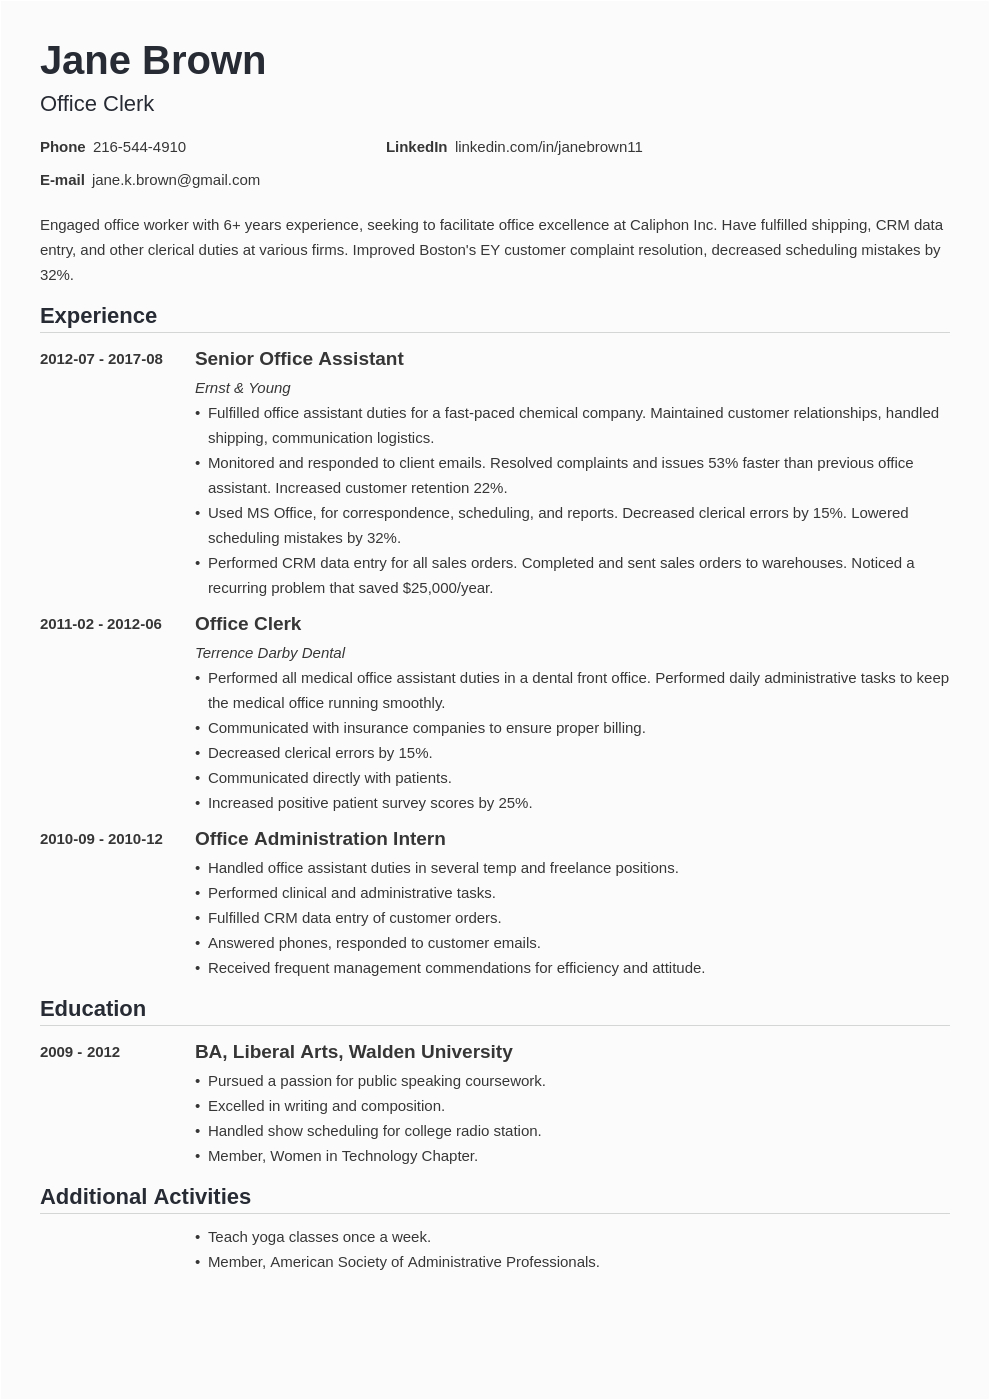 Sample Of Resume for Office Staff Position Fice Clerk Resume Samples & Writing Guide with Tips